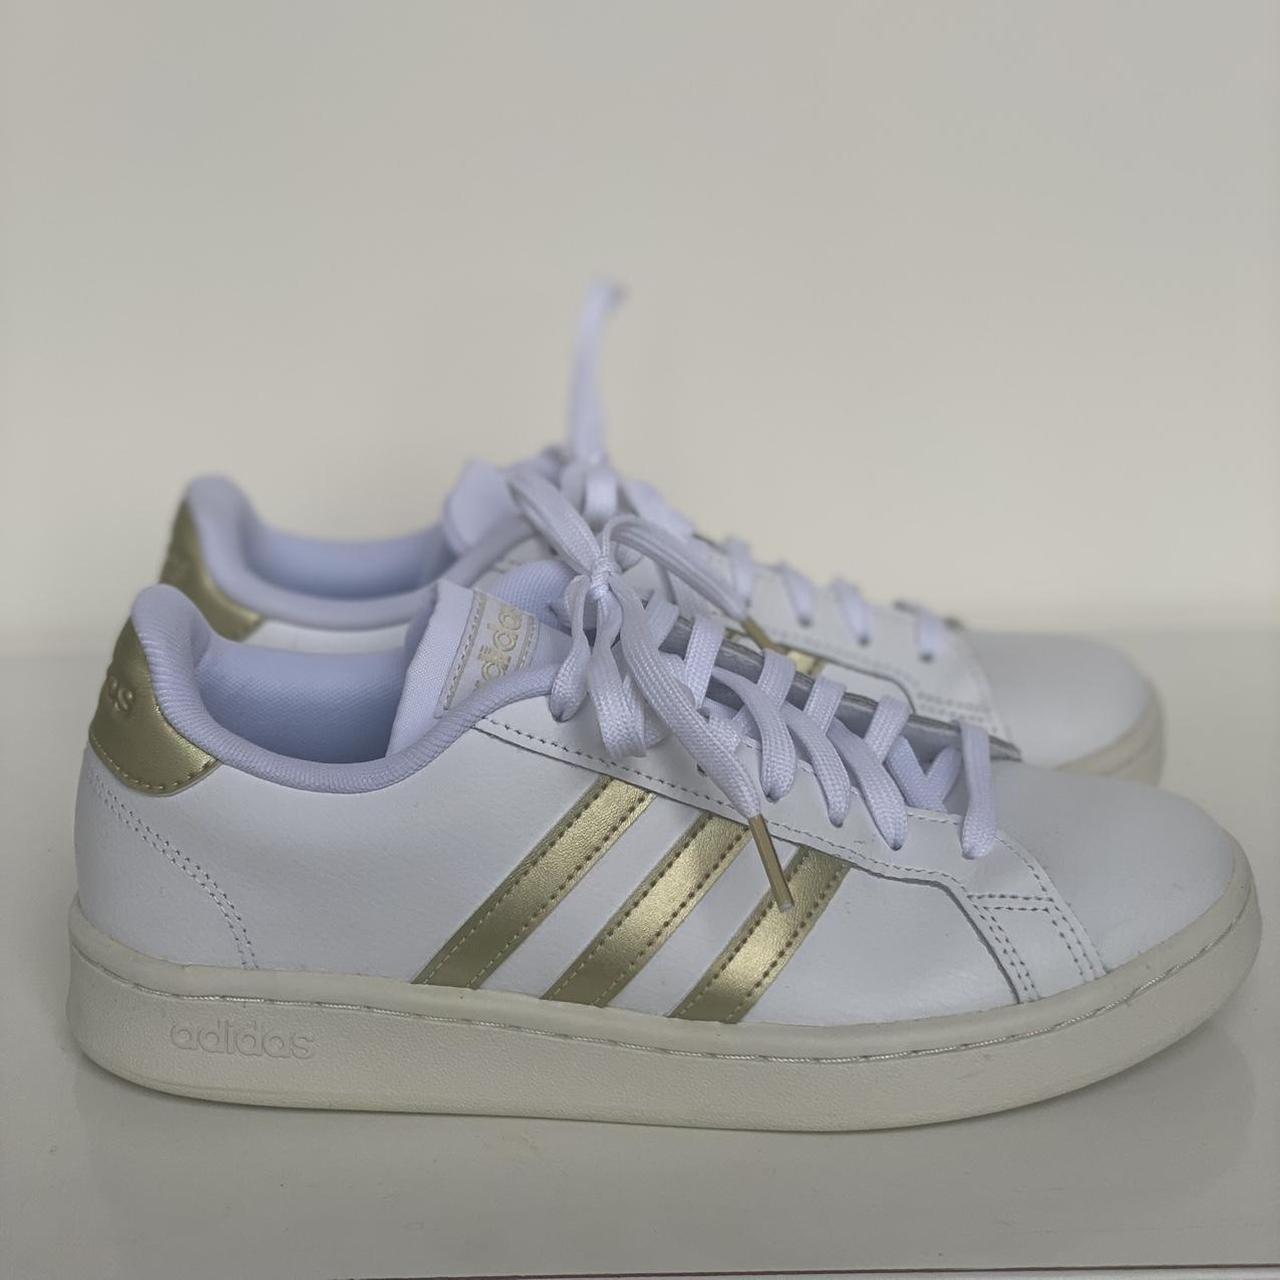 Adidas Women's White and Gold Trainers